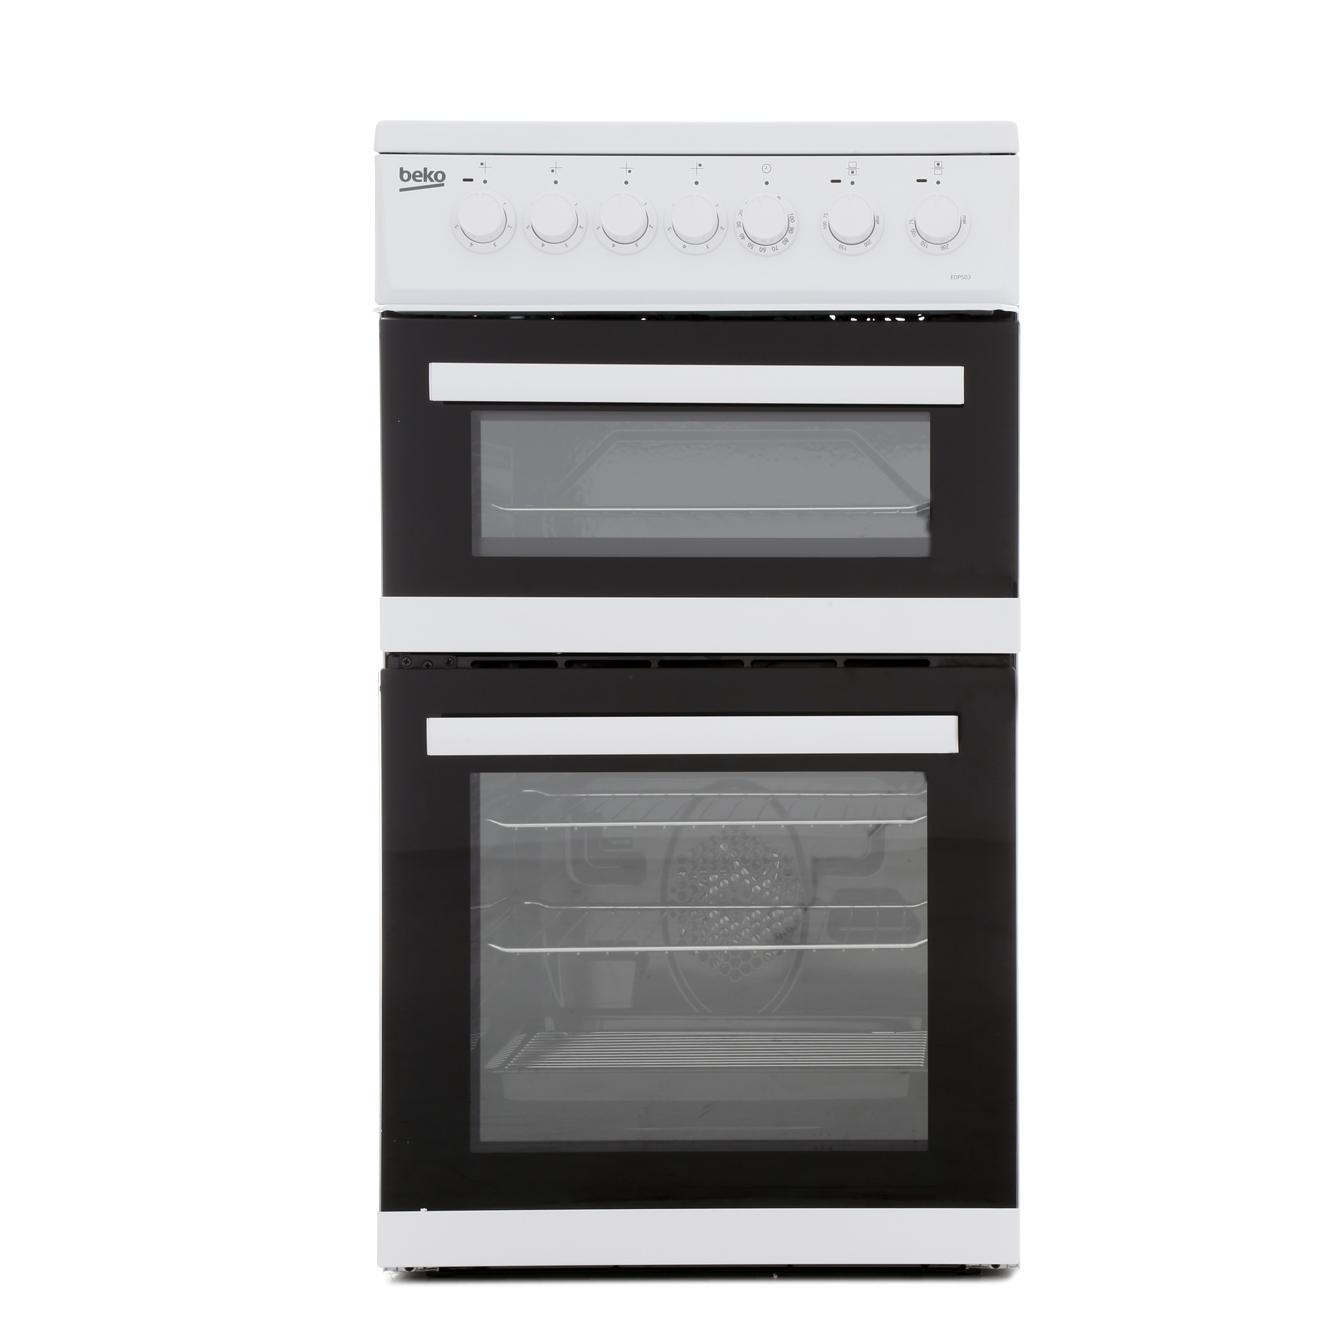 Beko EDP503W Solid Plate Electric Cooker with Double Oven